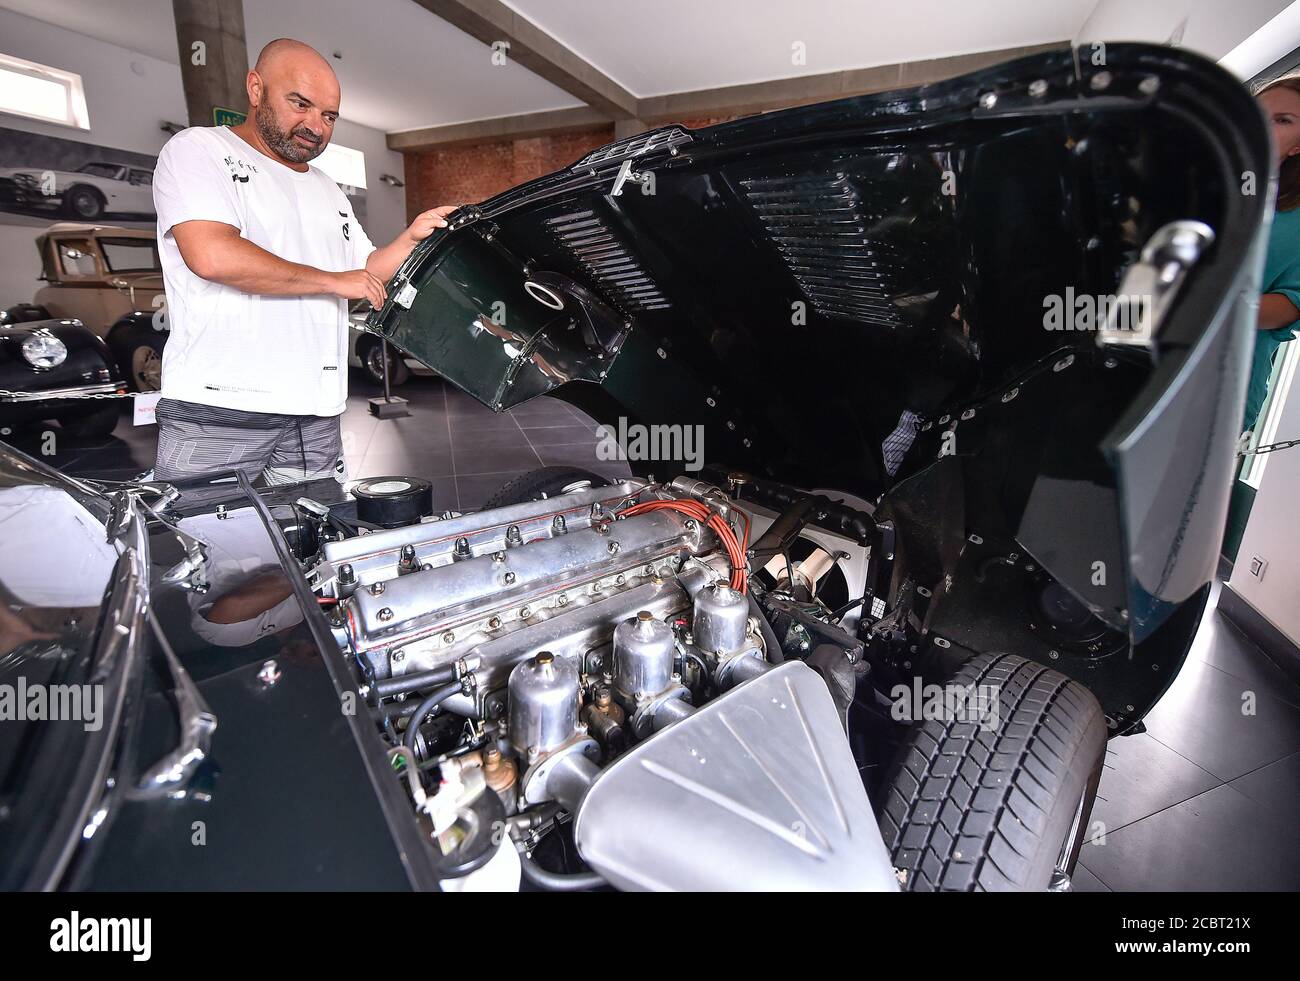 Trebic, Moravia. 11th Aug, 2020. Juraj Urbancik shows Jaguar E-Type's six-cylinder engine at the exposition dedicated to historical British sports cars Jaguar in Trebic, Moravia, Czech Republic, August 11, 2020. A long-time car fan Juraj Urbancik has been running the exhibition for about eight years. His collection of Jaguar cars is one of the largest in the country. Credit: Lubos Pavlicek/CTK Photo/Alamy Live News Stock Photo